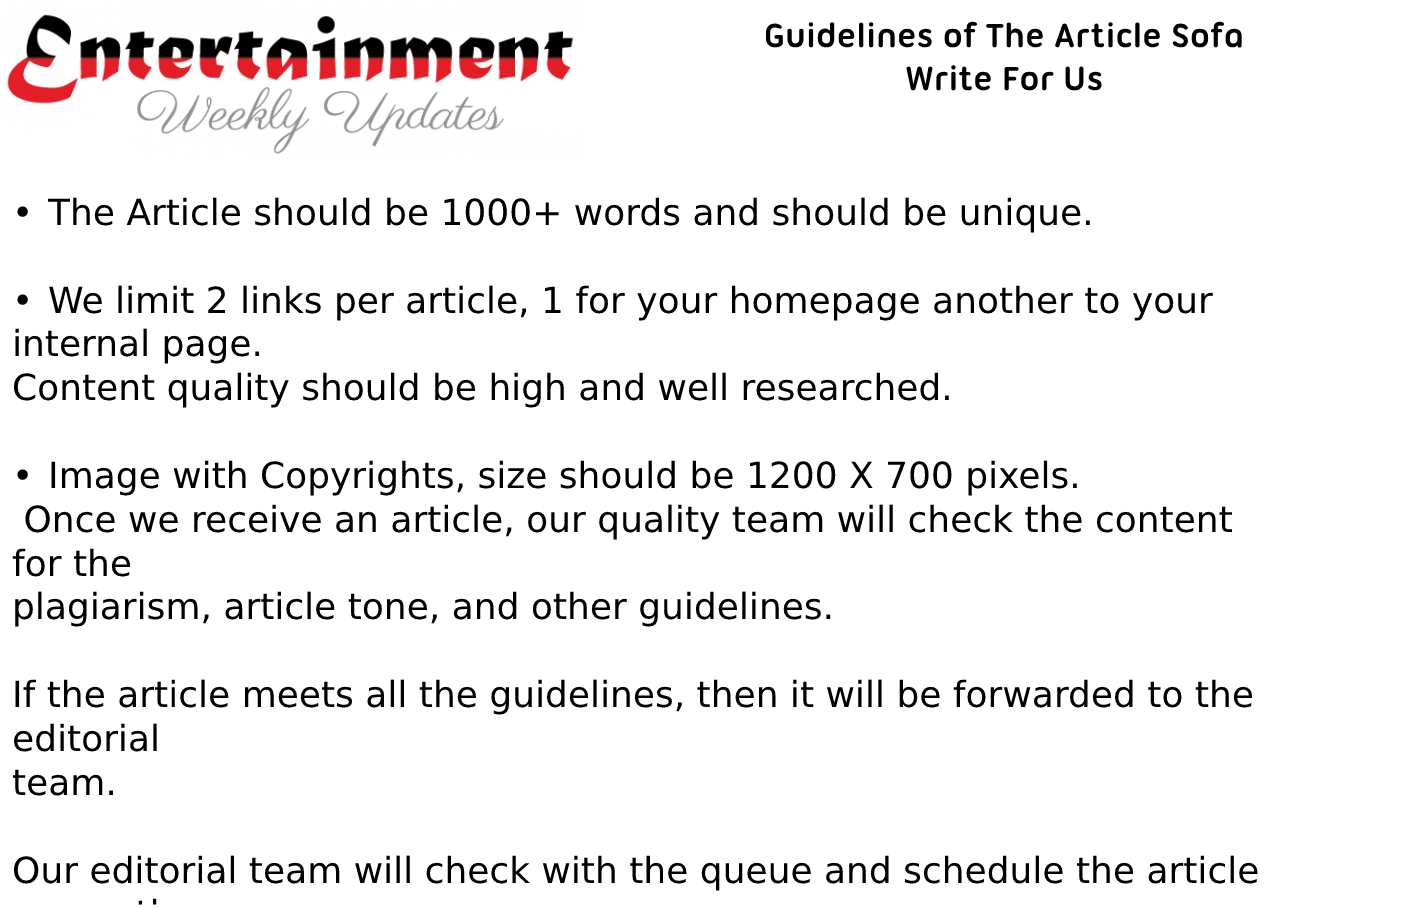 Guidelines of The Article Sofa Write For Us